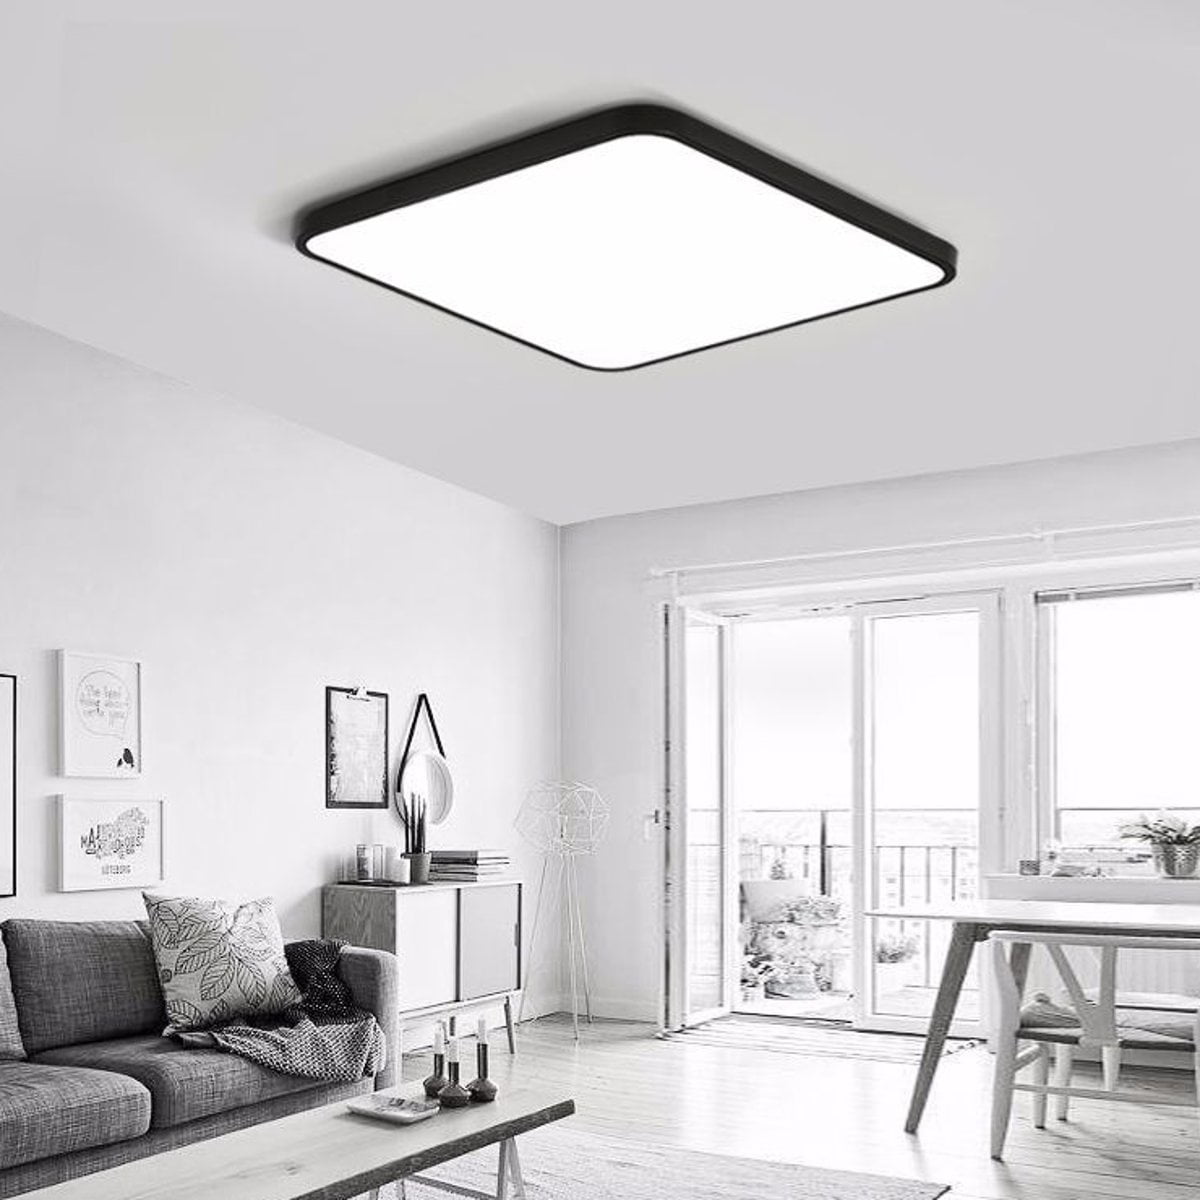 20W Square LED Ceiling Light Fixture with Remote Control Dimmable Color ...